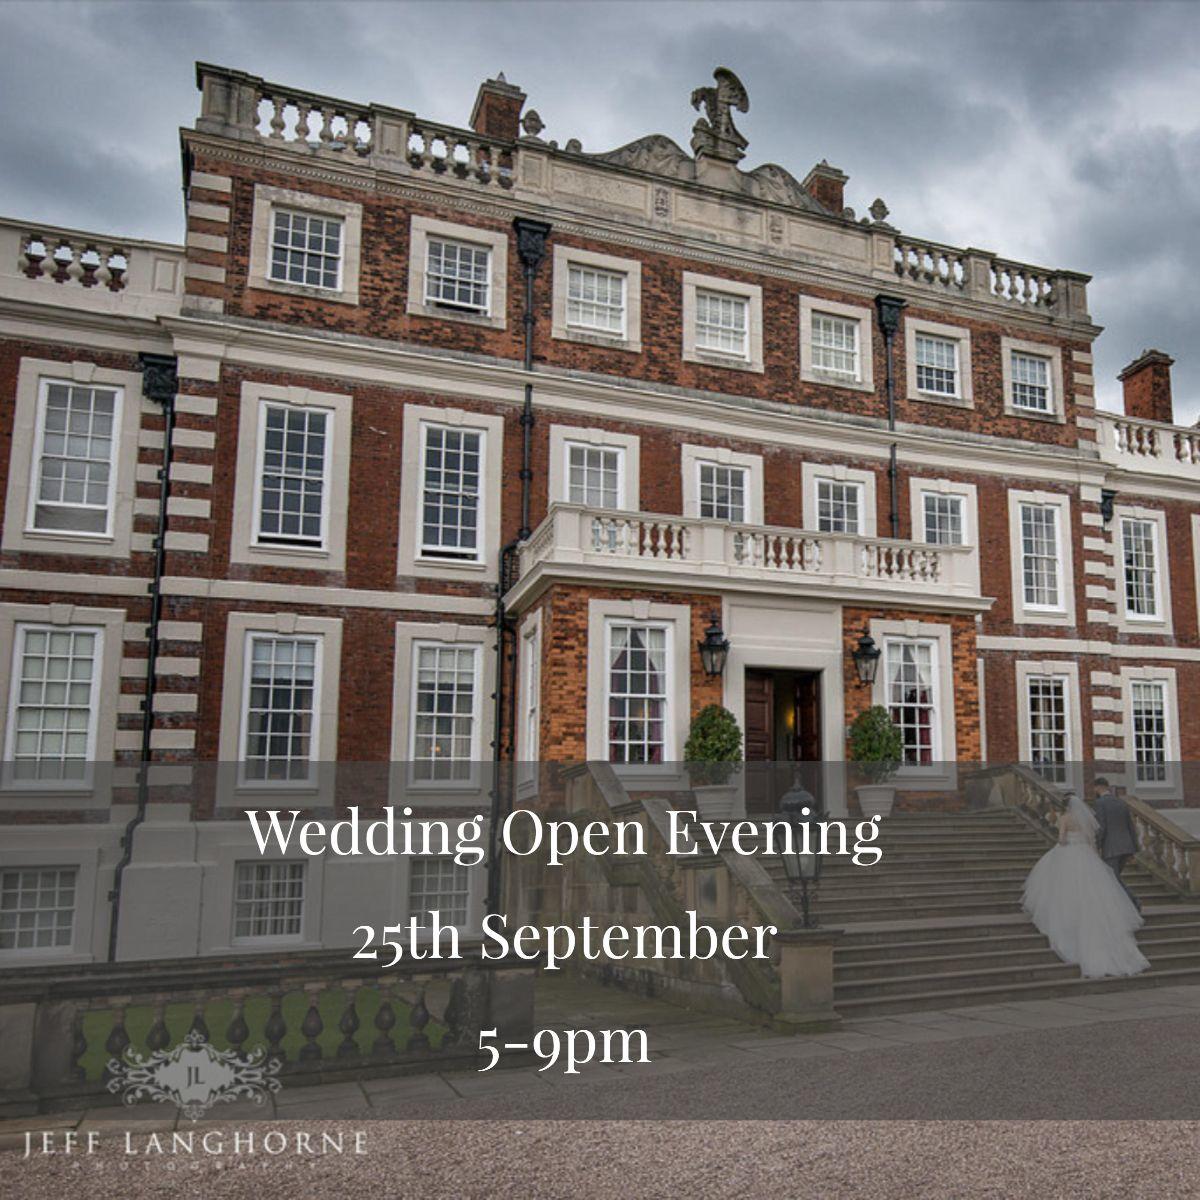 #Datefordiary Join us at our Wedding Open Evening and let us help you turn your wedding dreams into reality 💍 
#wedding #weddingplanning #weddinginspiration #weddingvenue #weddingwednesday #engaged #bridetobe